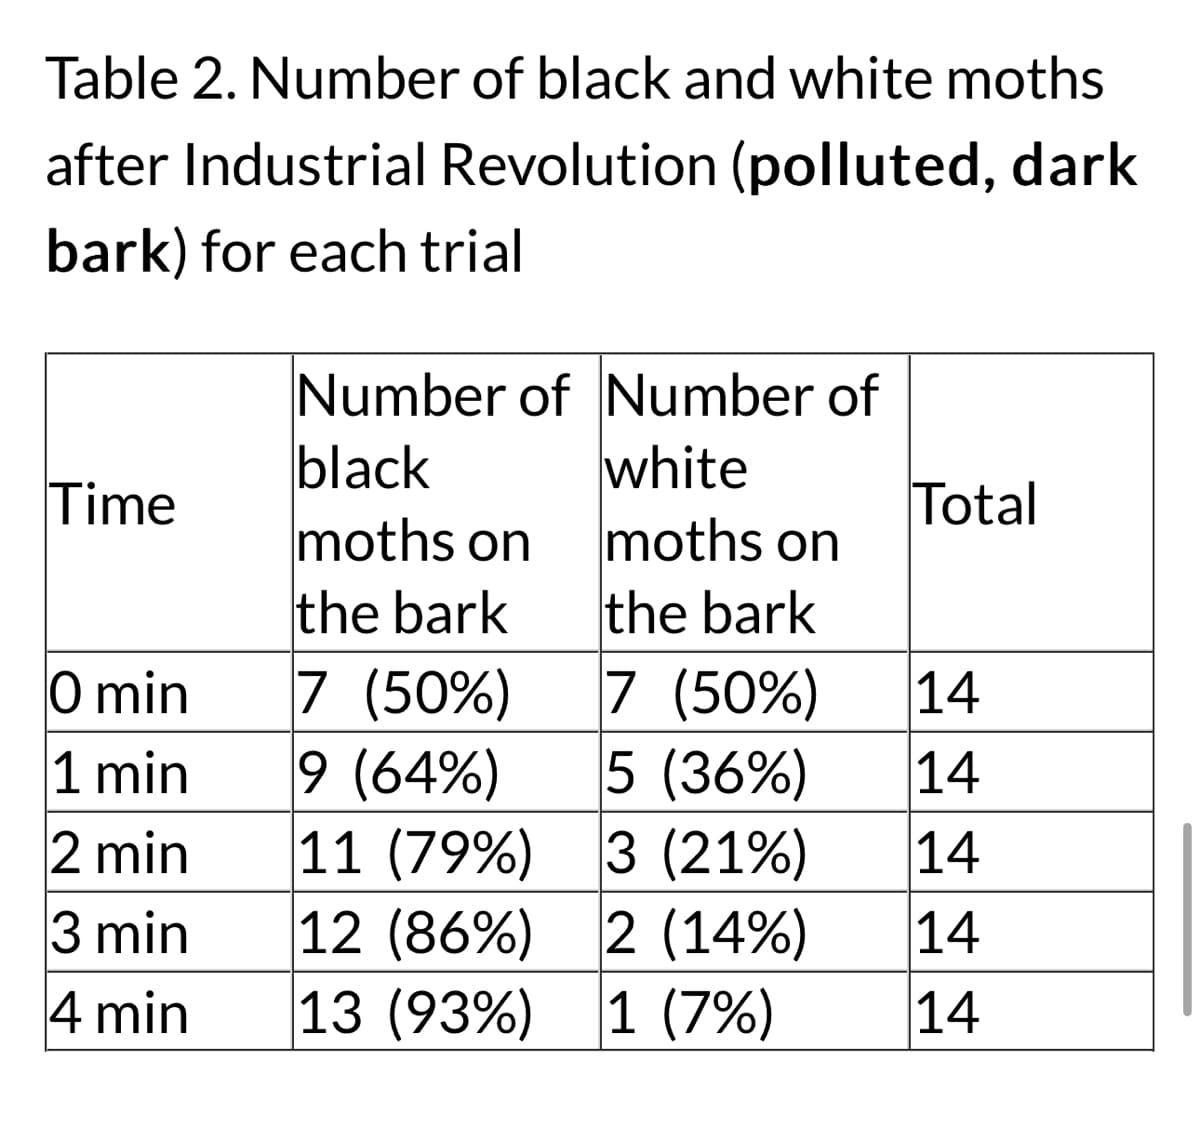 Table 2. Number of black and white moths
after Industrial Revolution (polluted, dark
bark) for each trial
Time
0 min
1 min
2 min
3 min
4 min
Number of Number of
black
white
moths on
moths on
the bark
the bark
7 (50%)
7 (50%)
9 (64%)
5 (36%)
11
(79%)
3 (21%)
12 (86%)
2 (14%)
13 (93%) 1 (7%)
Total
14
14
14
14
14